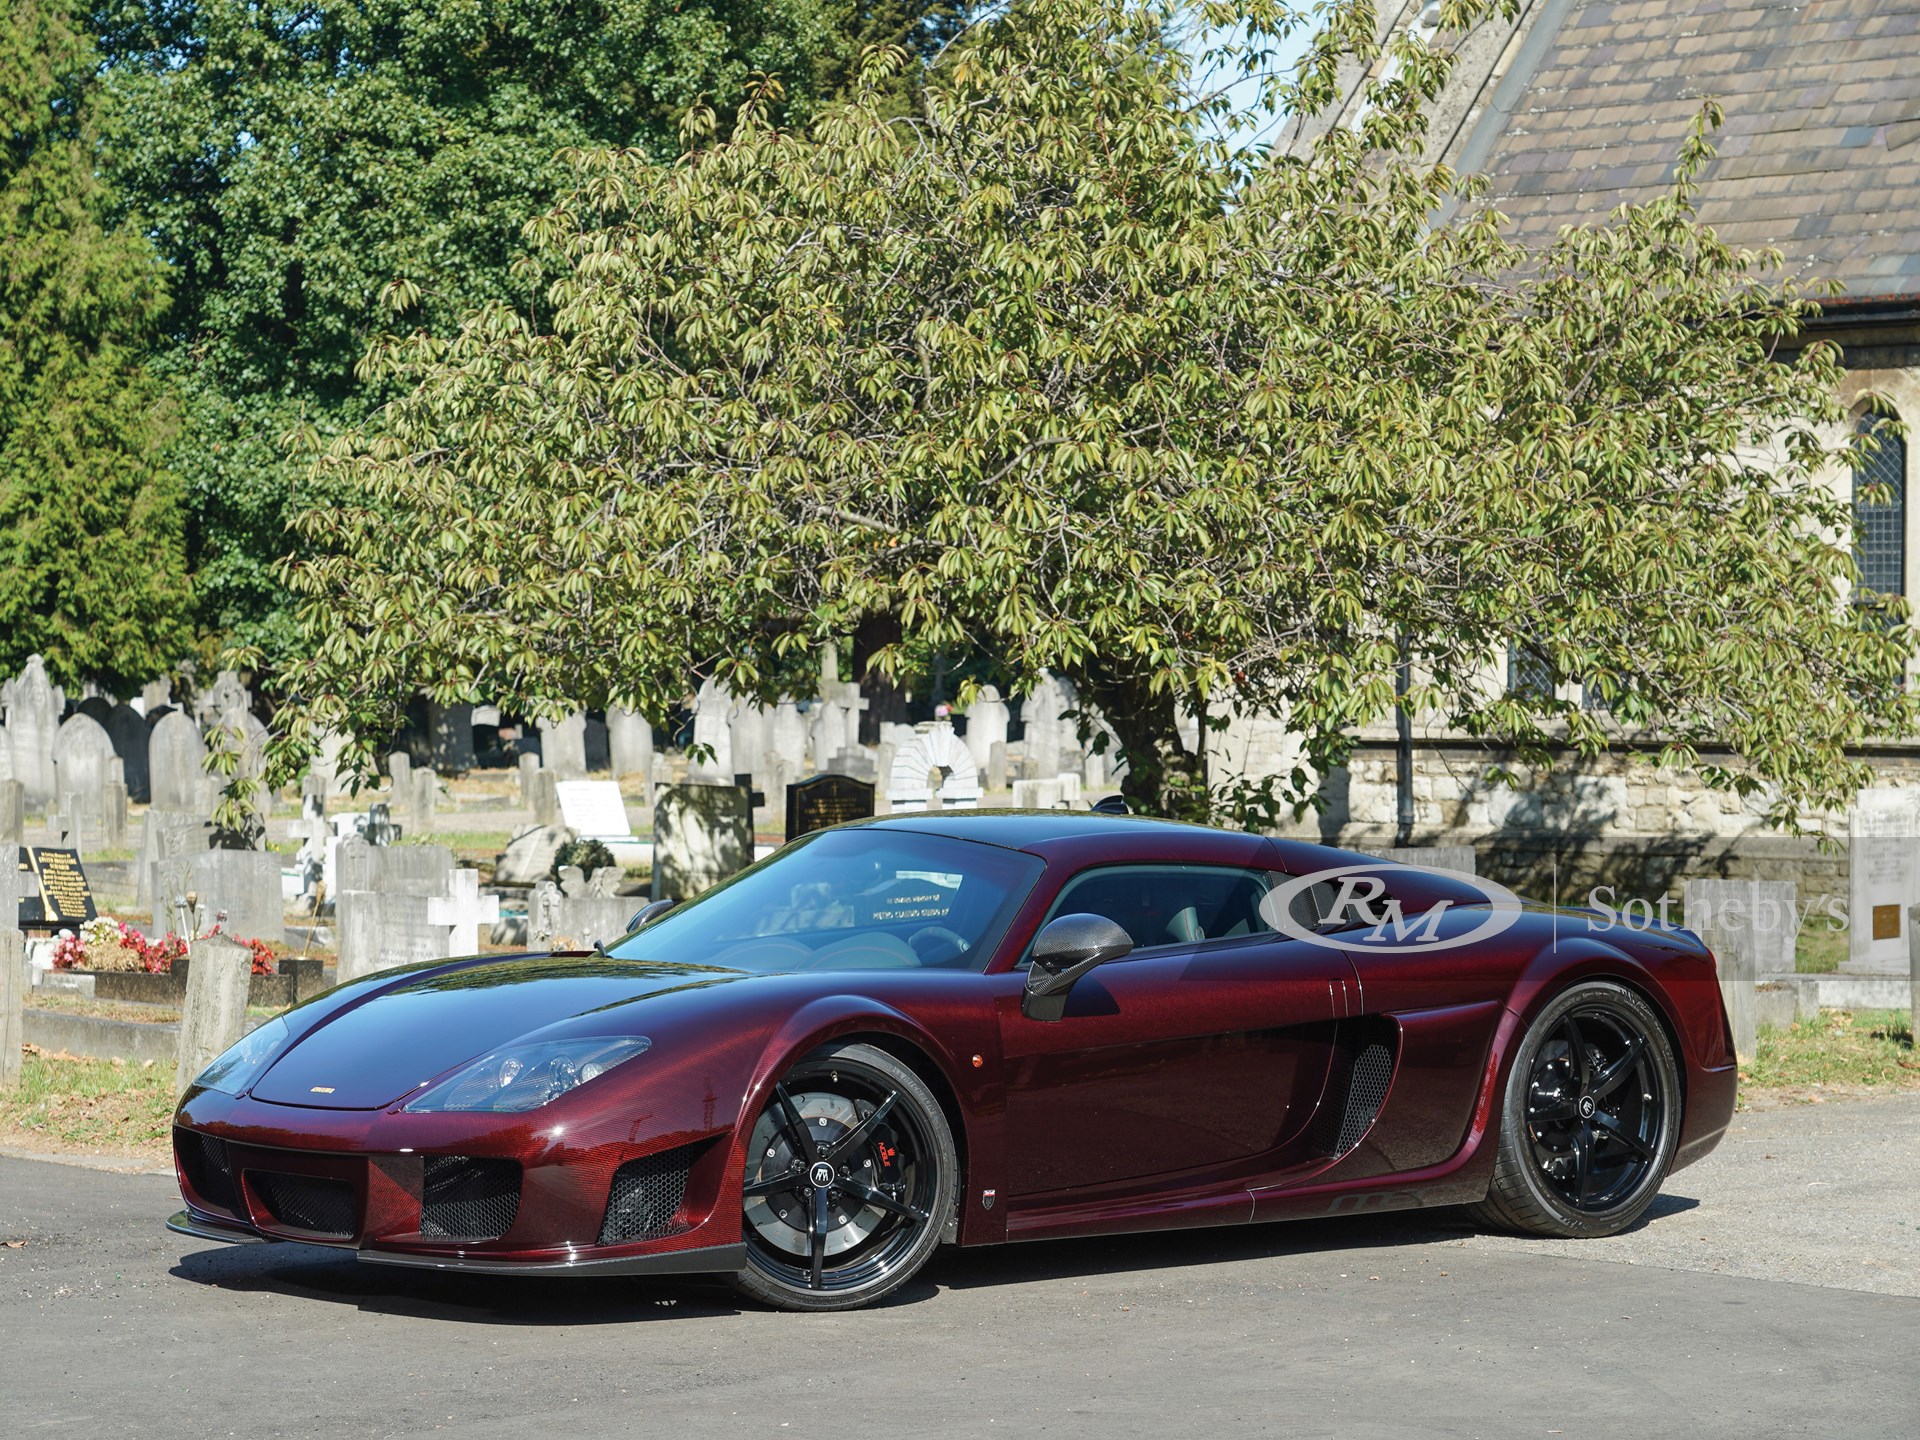 16 Noble M600 Carbonsport London 19 Rm Sotheby S